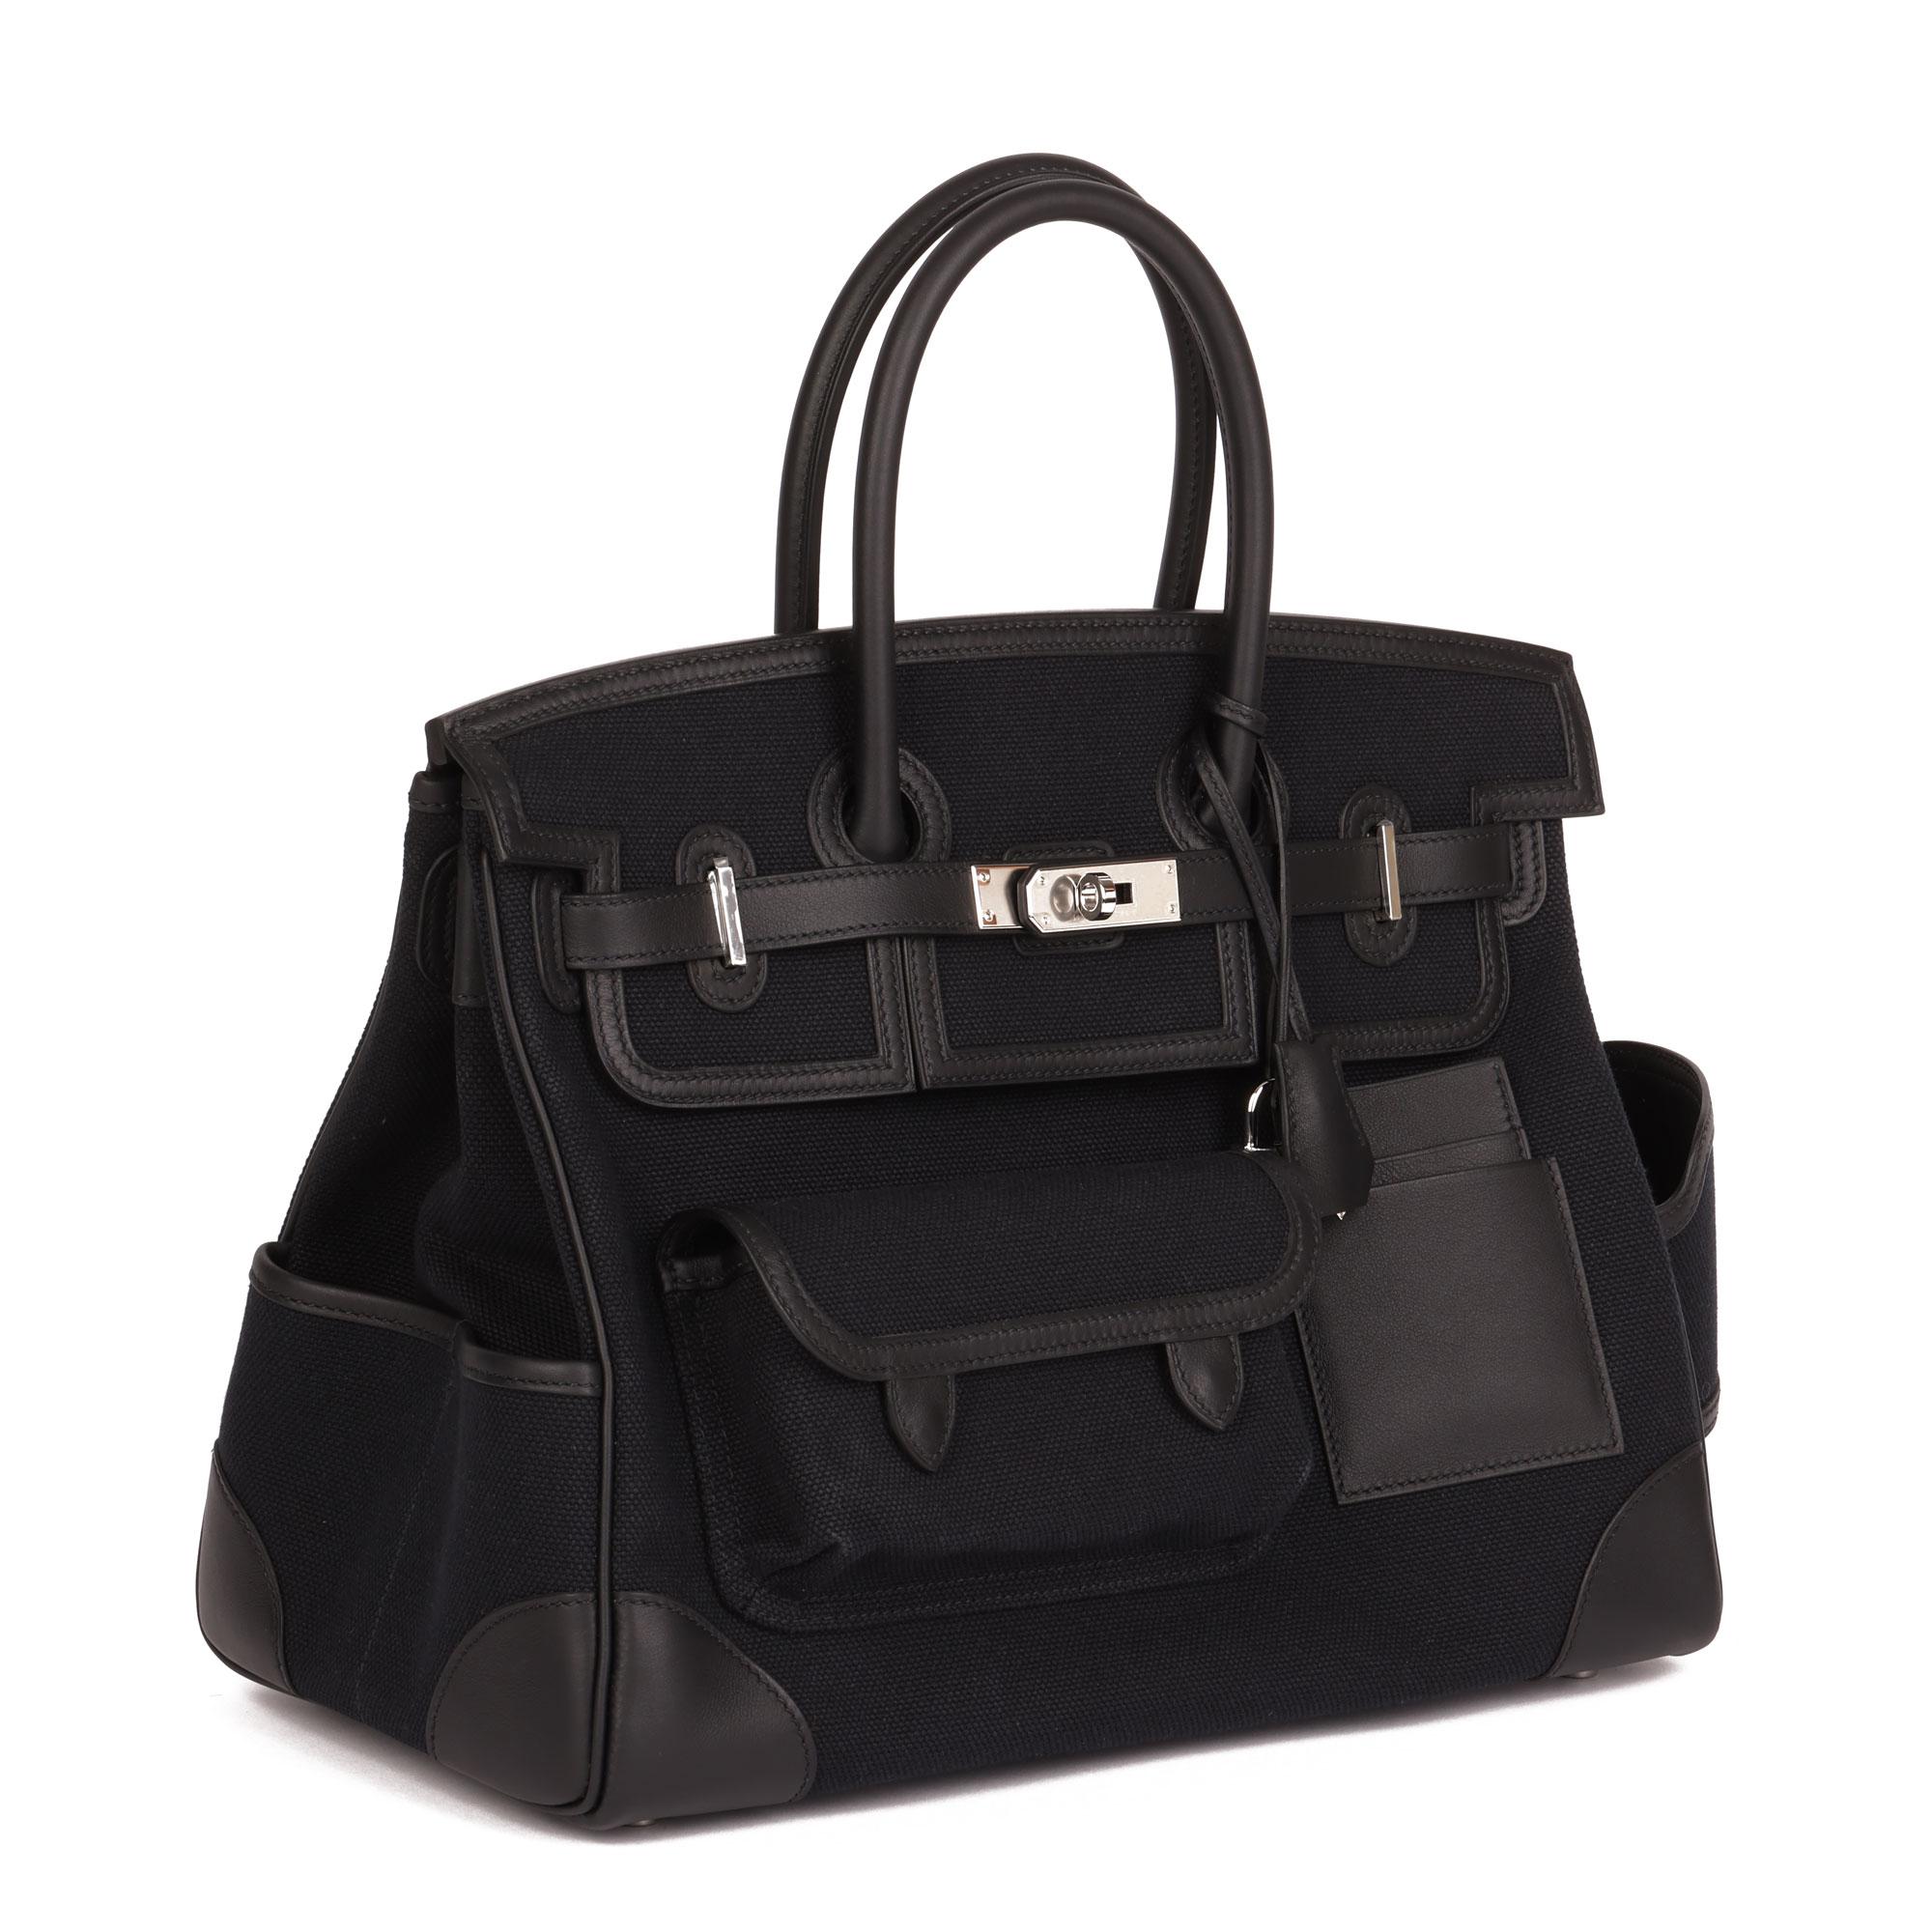 HERMÈS
Black Toile Canvas & Swift Leather Cargo Birkin 35cm

Xupes Reference: CB489
Serial Number: Z
Age (Circa): 2021
Accompanied By: Hermès Dust Bag, Box, Lock, Keys, Clochette, Rain Cover, Care Booklet, Cup Holder, Card Holder,